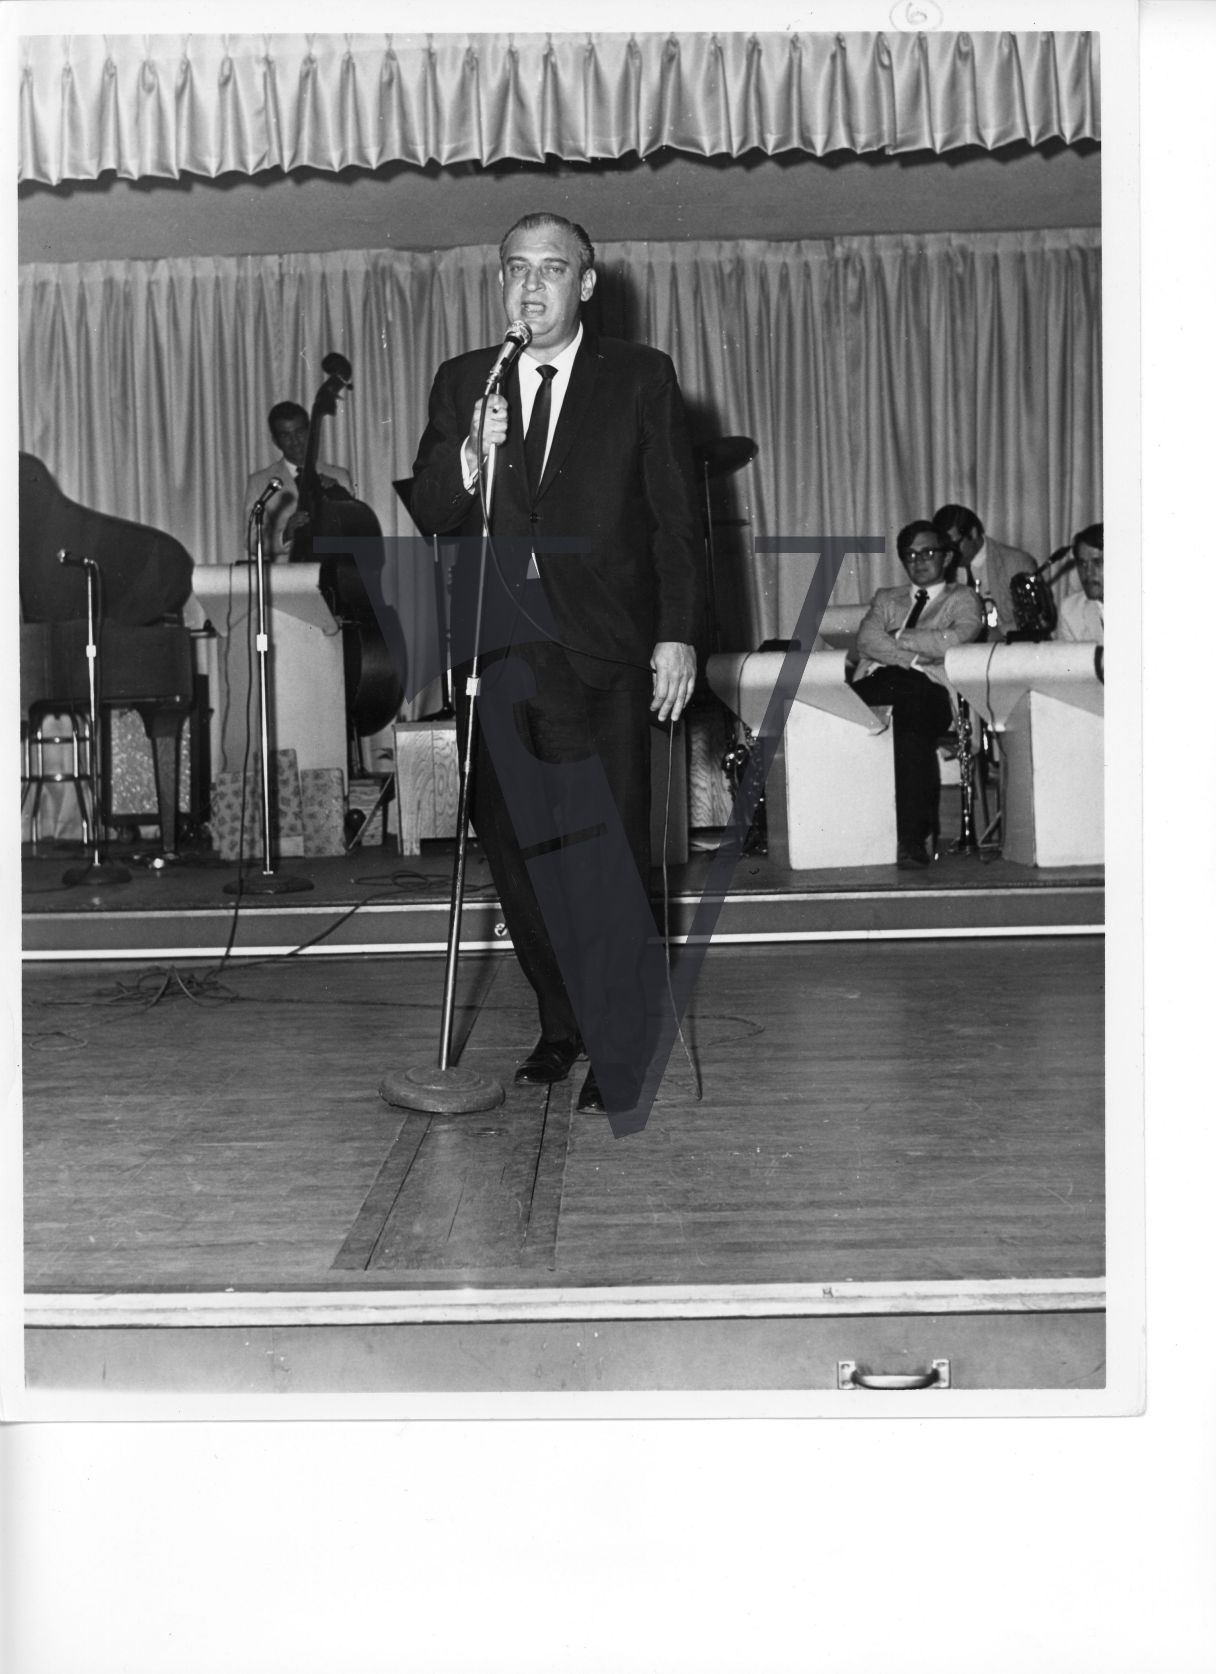 Rodney Dangerfield, actor, comedian, performing, band, musicians, full shot.